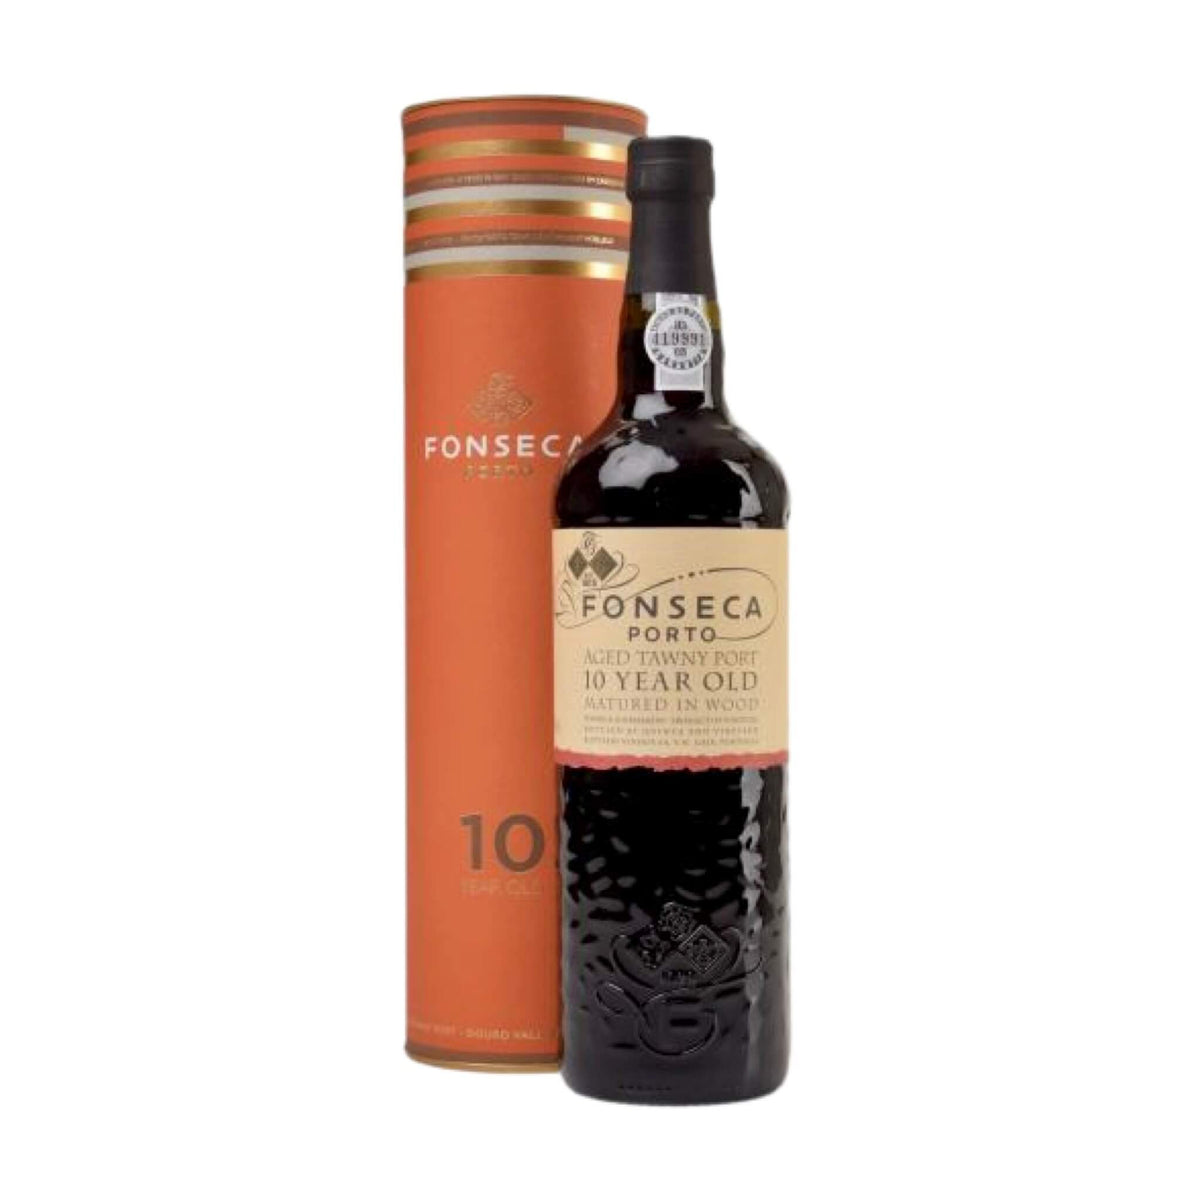 Fonseca-Rotwein-Div. Blend-10 Years Old Aged Tawny Port in Tube-WINECOM